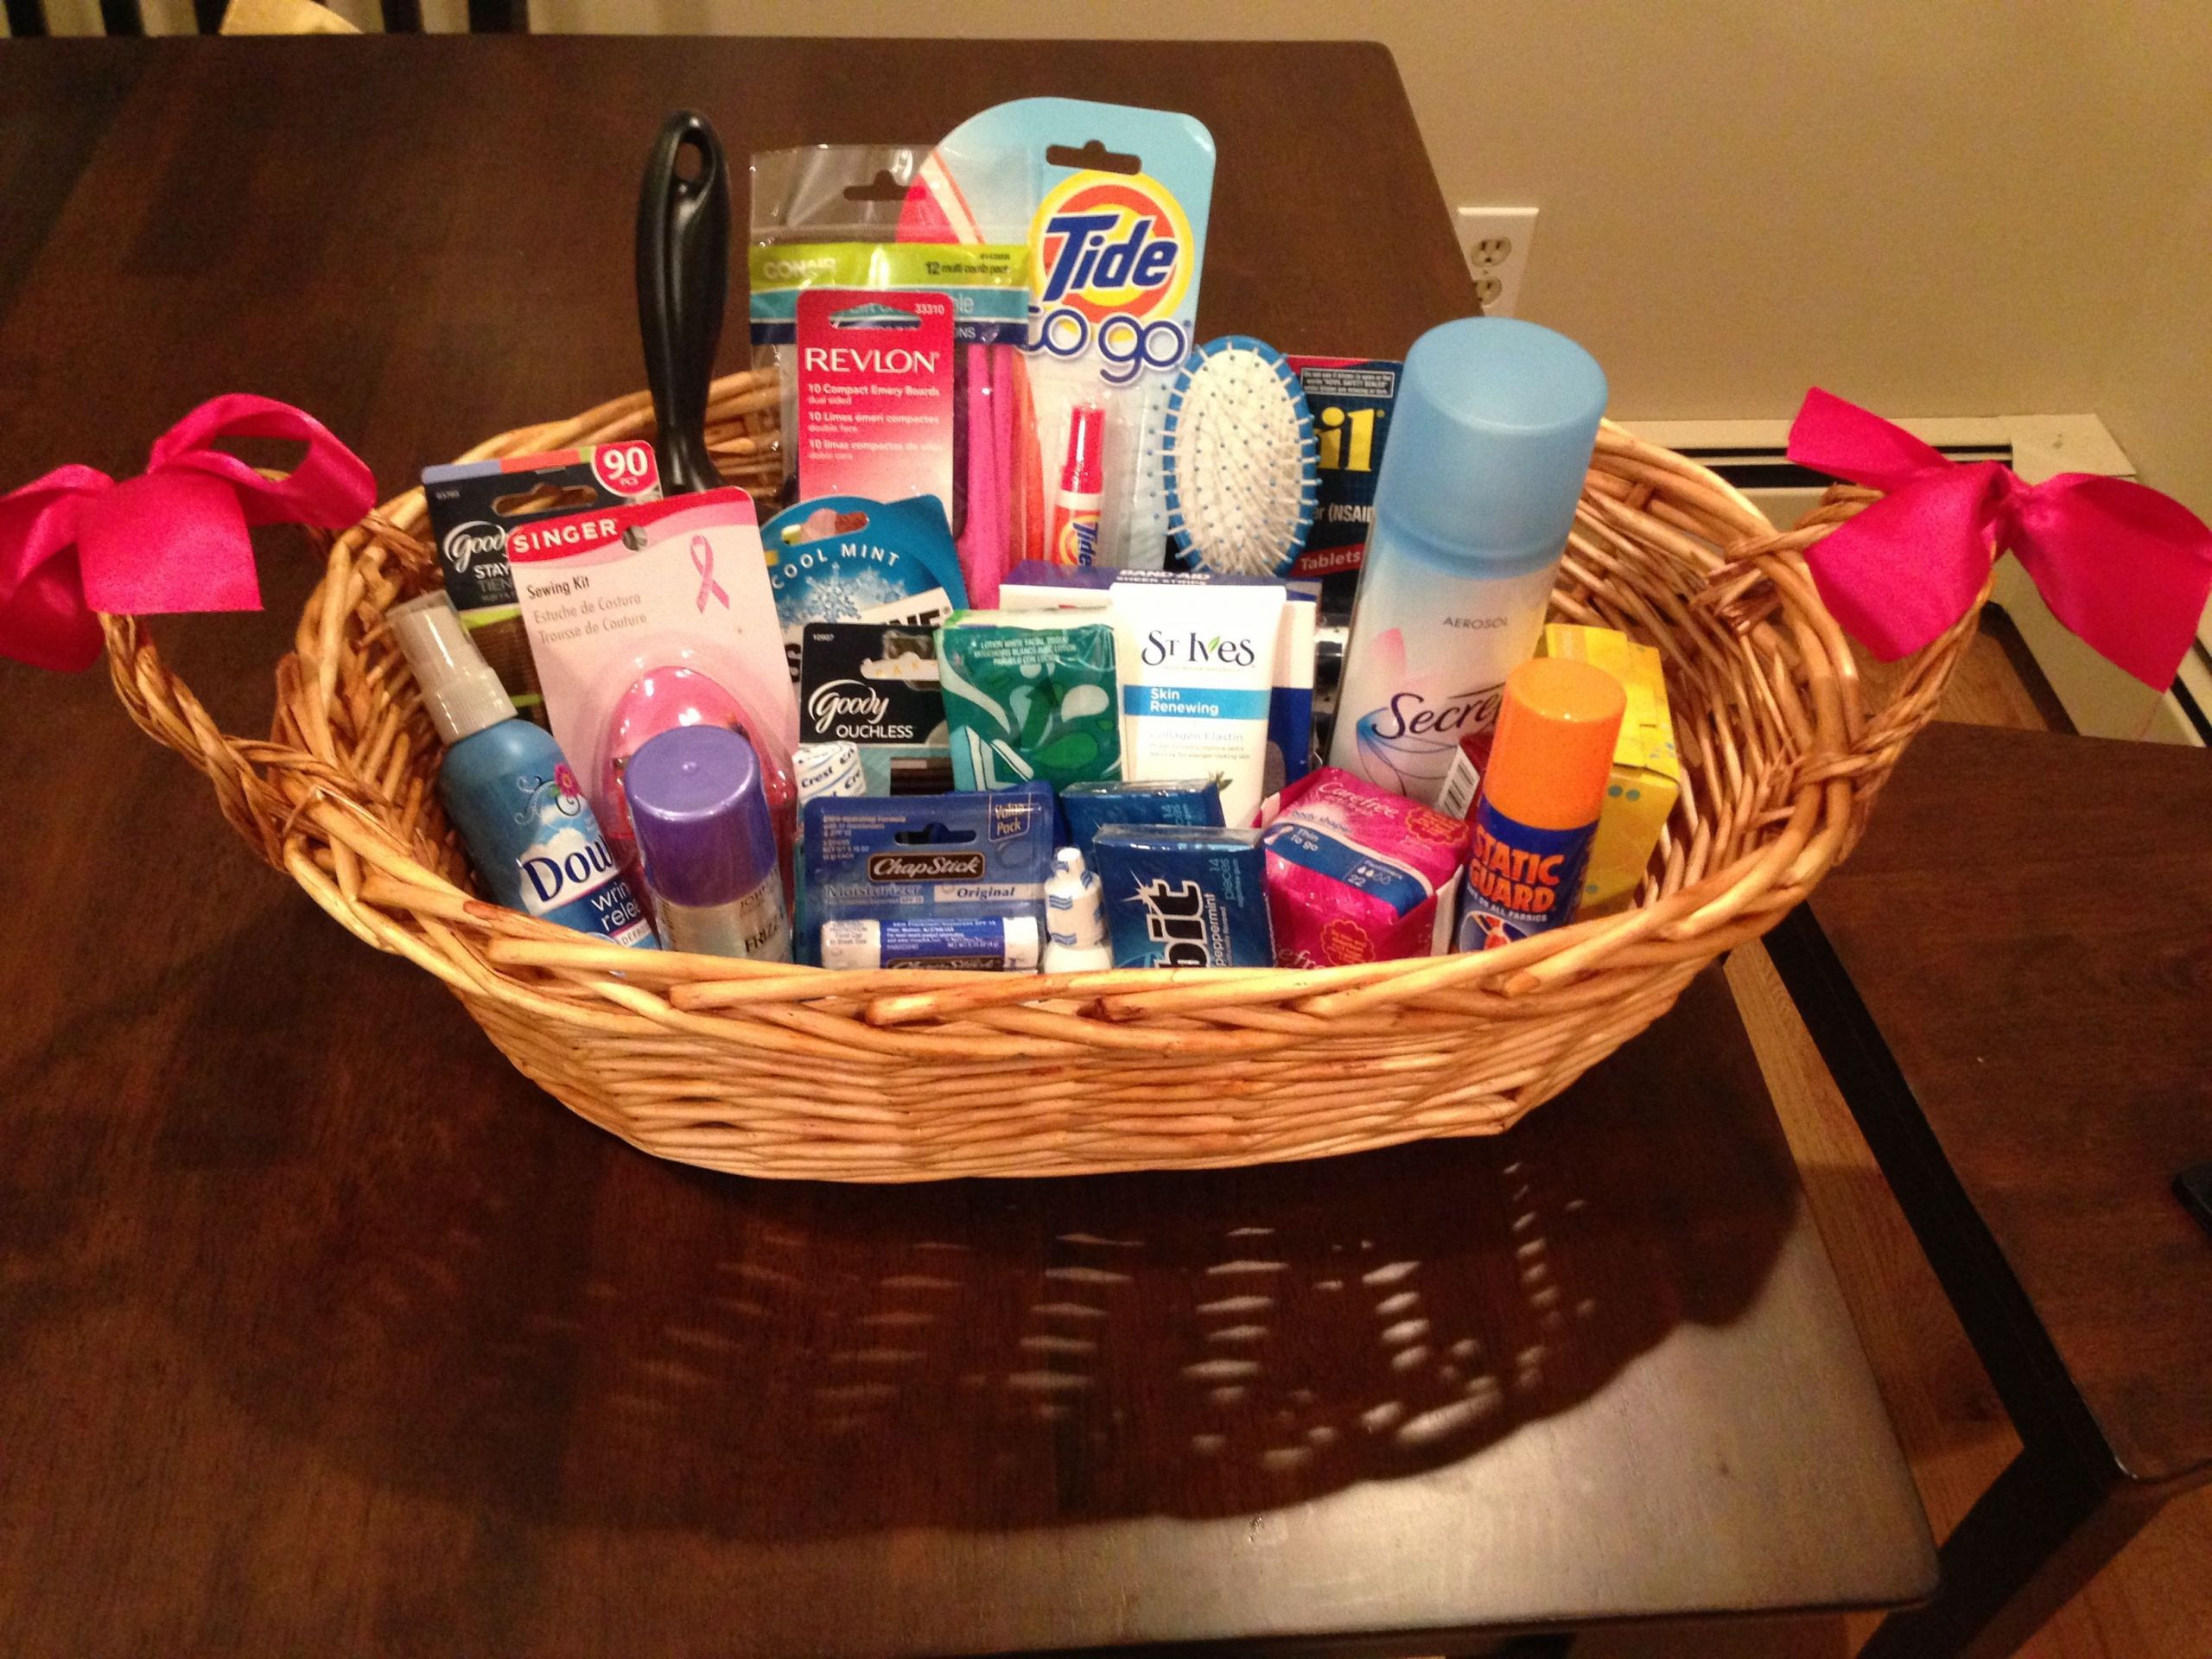 Bridal Shower Gift Basket Ideas For Guests
 Wedding bathroom baskets make it easy to see everything